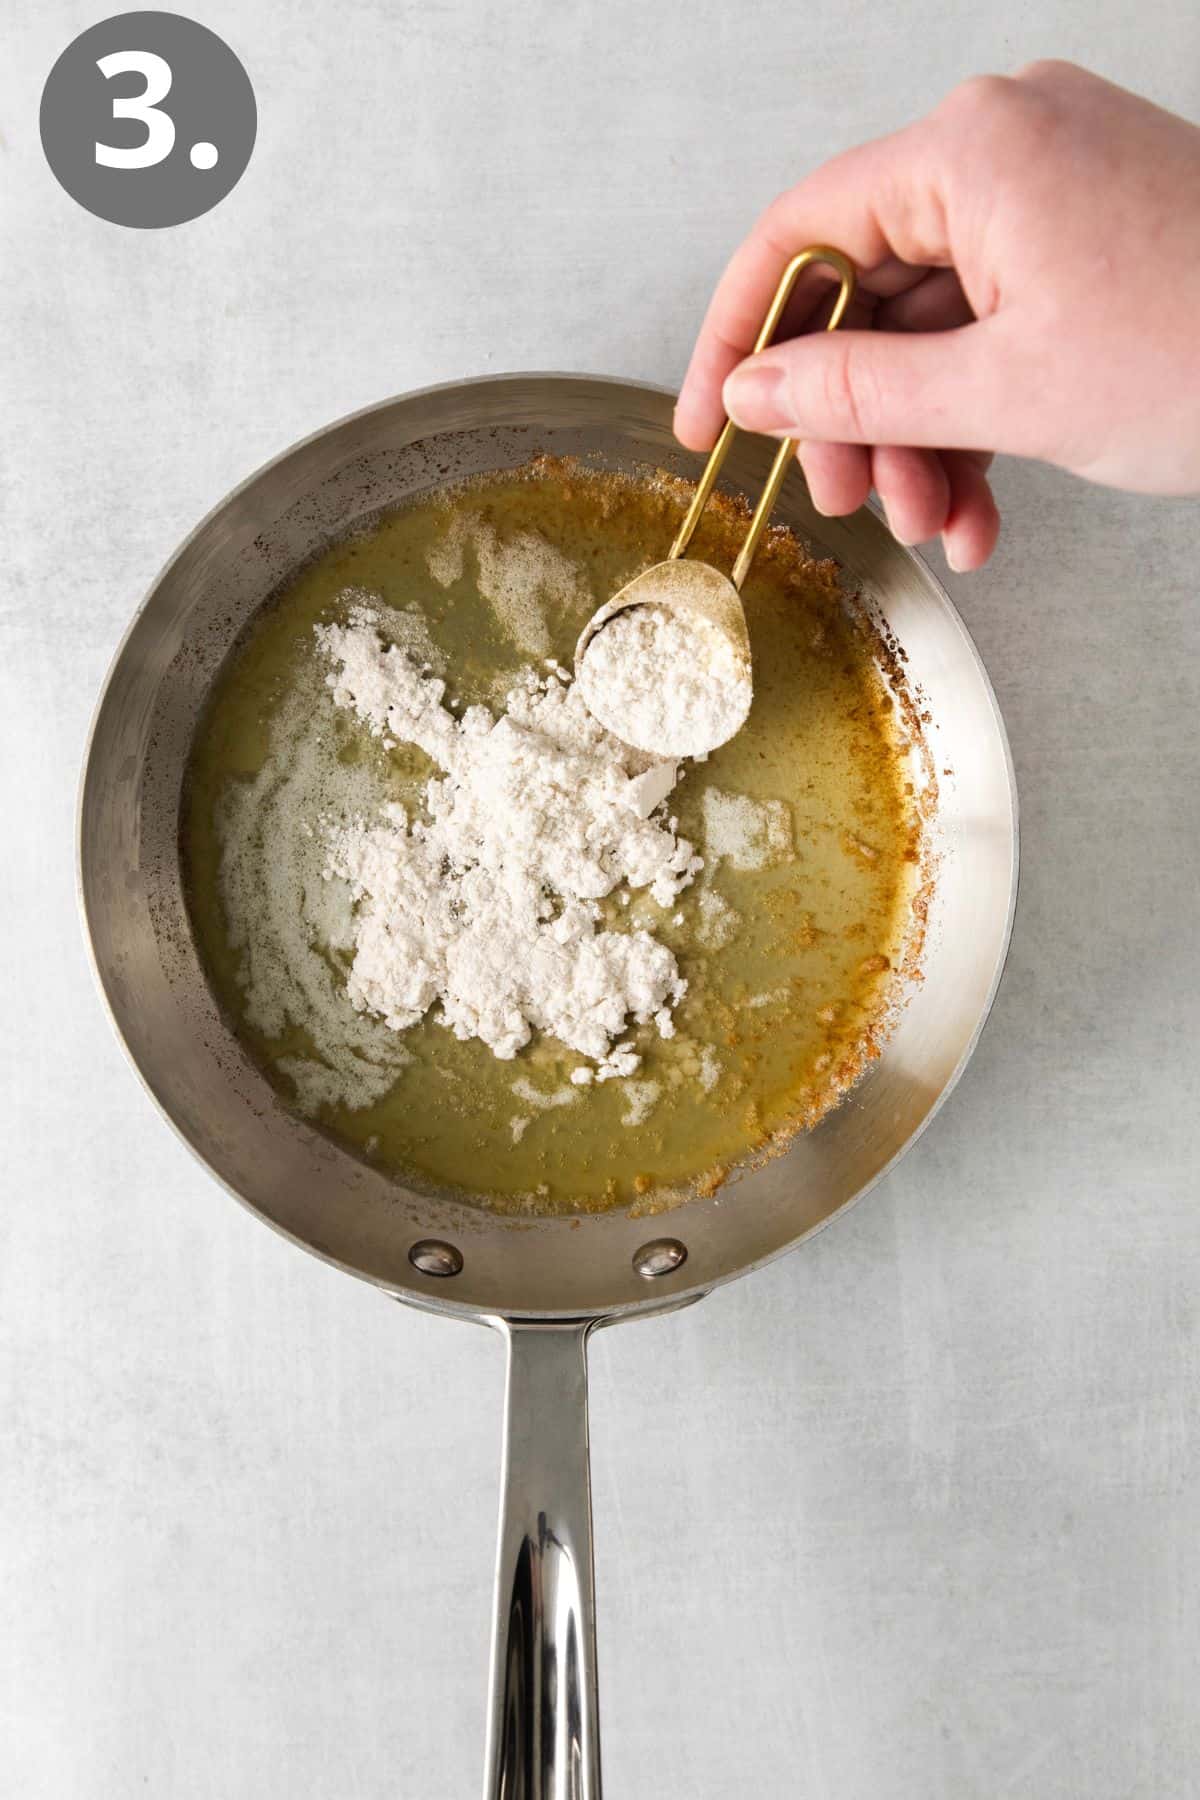 Flour being poured into a skillet with melted butter